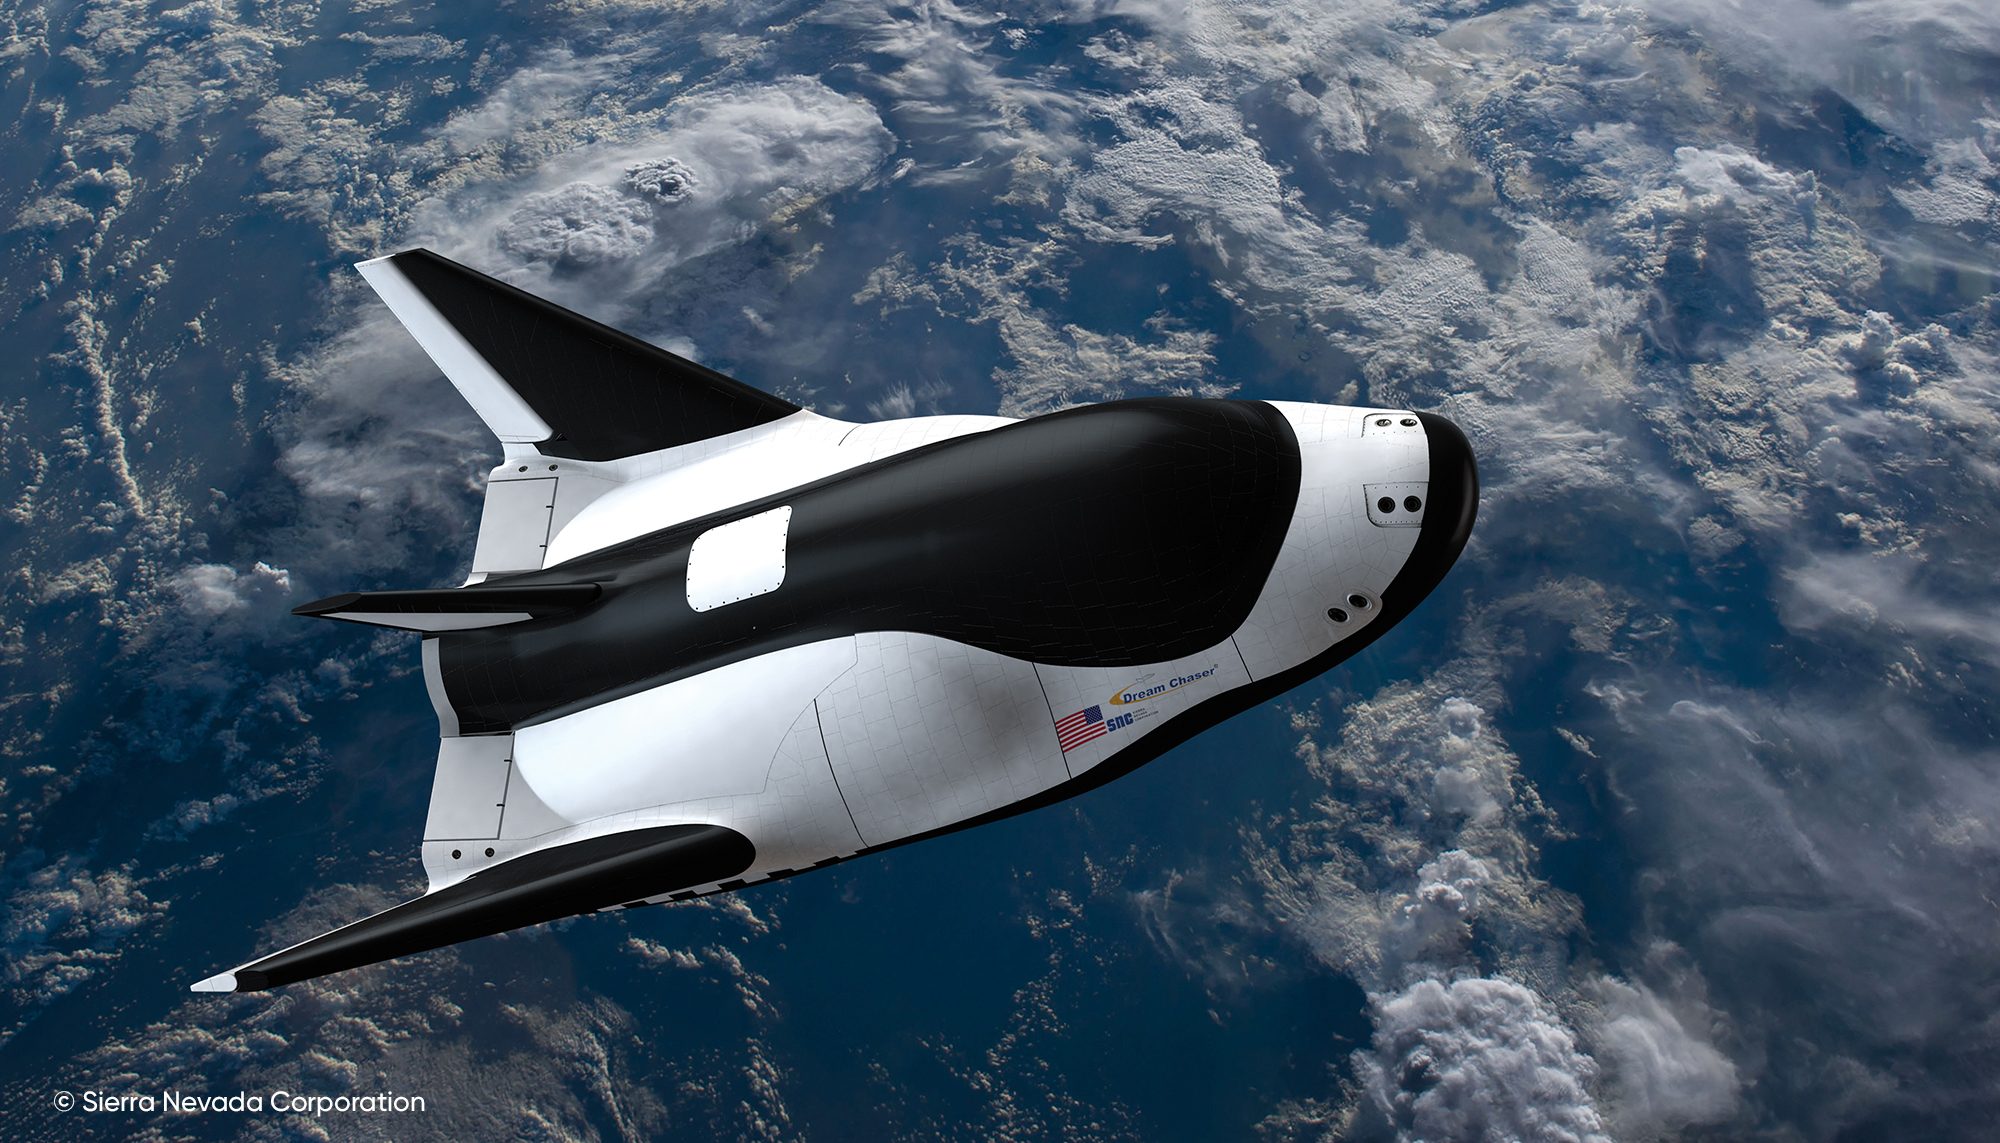 dream-chaser-in-flight-with-credit.jpg